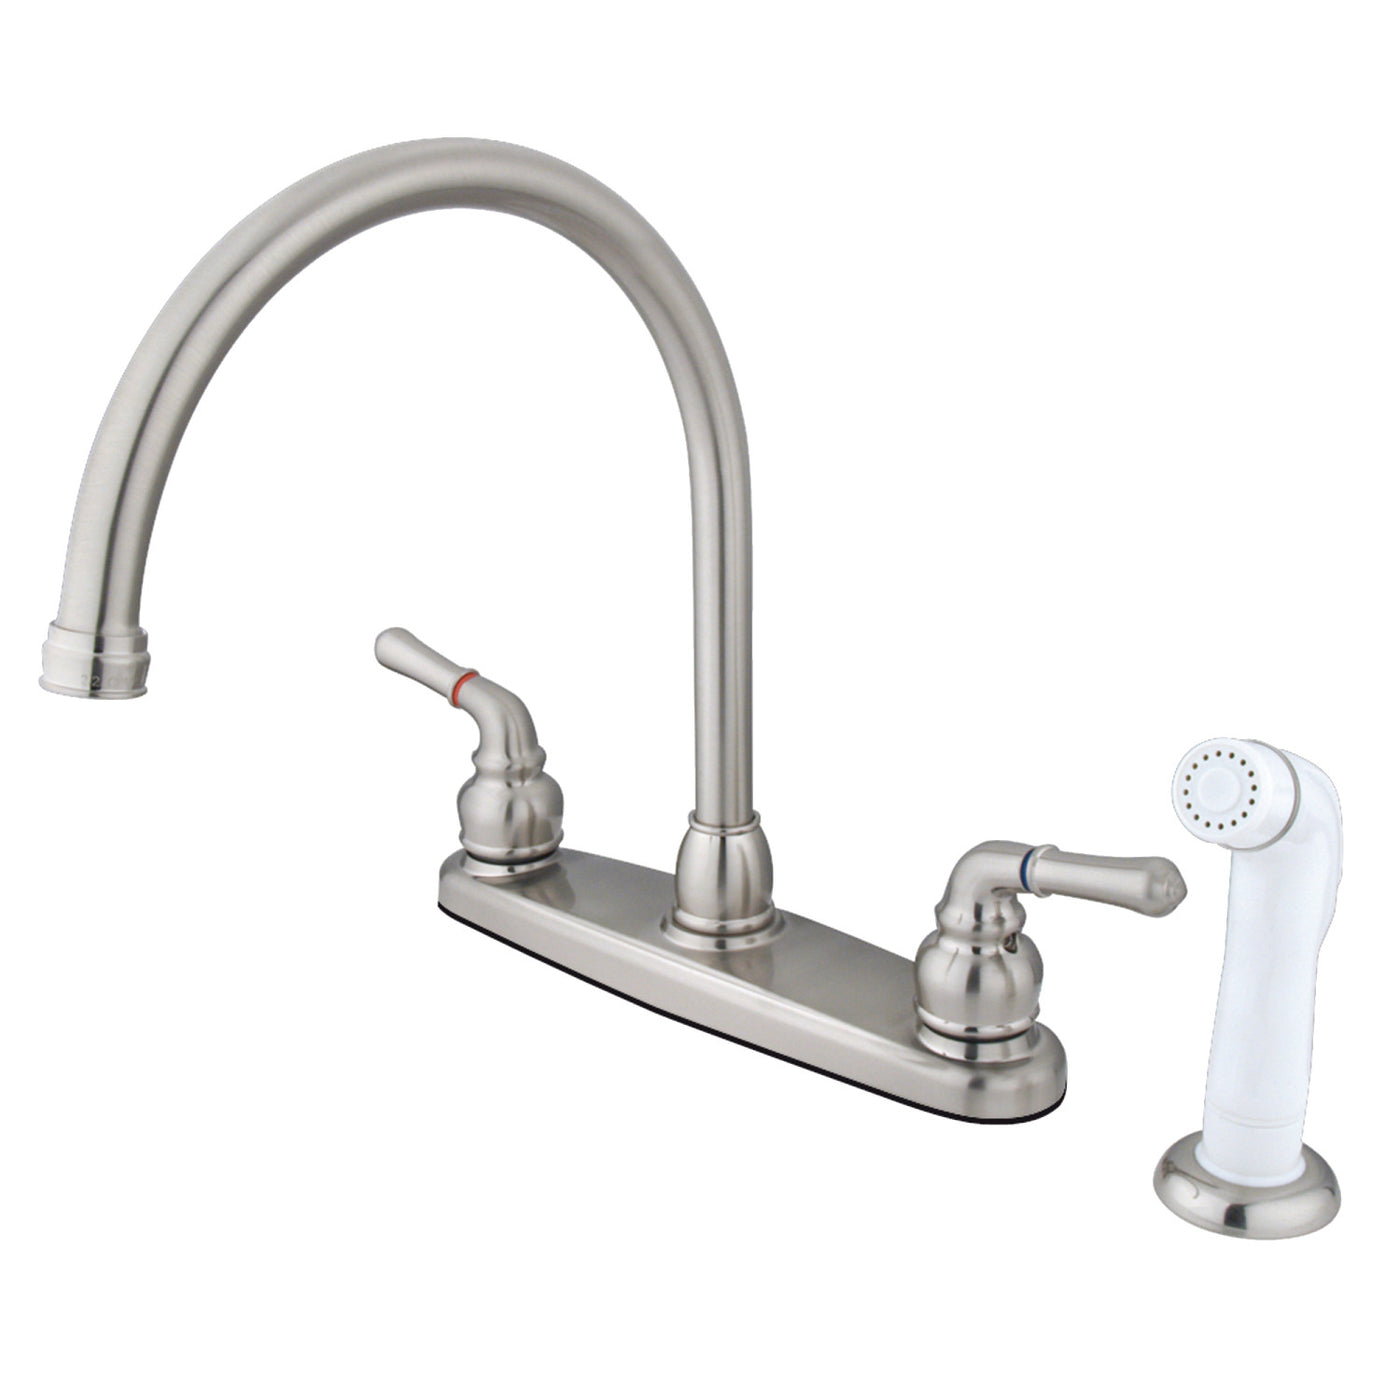 Elements of Design EB798 8-Inch Centerset Kitchen Faucet, Brushed Nickel